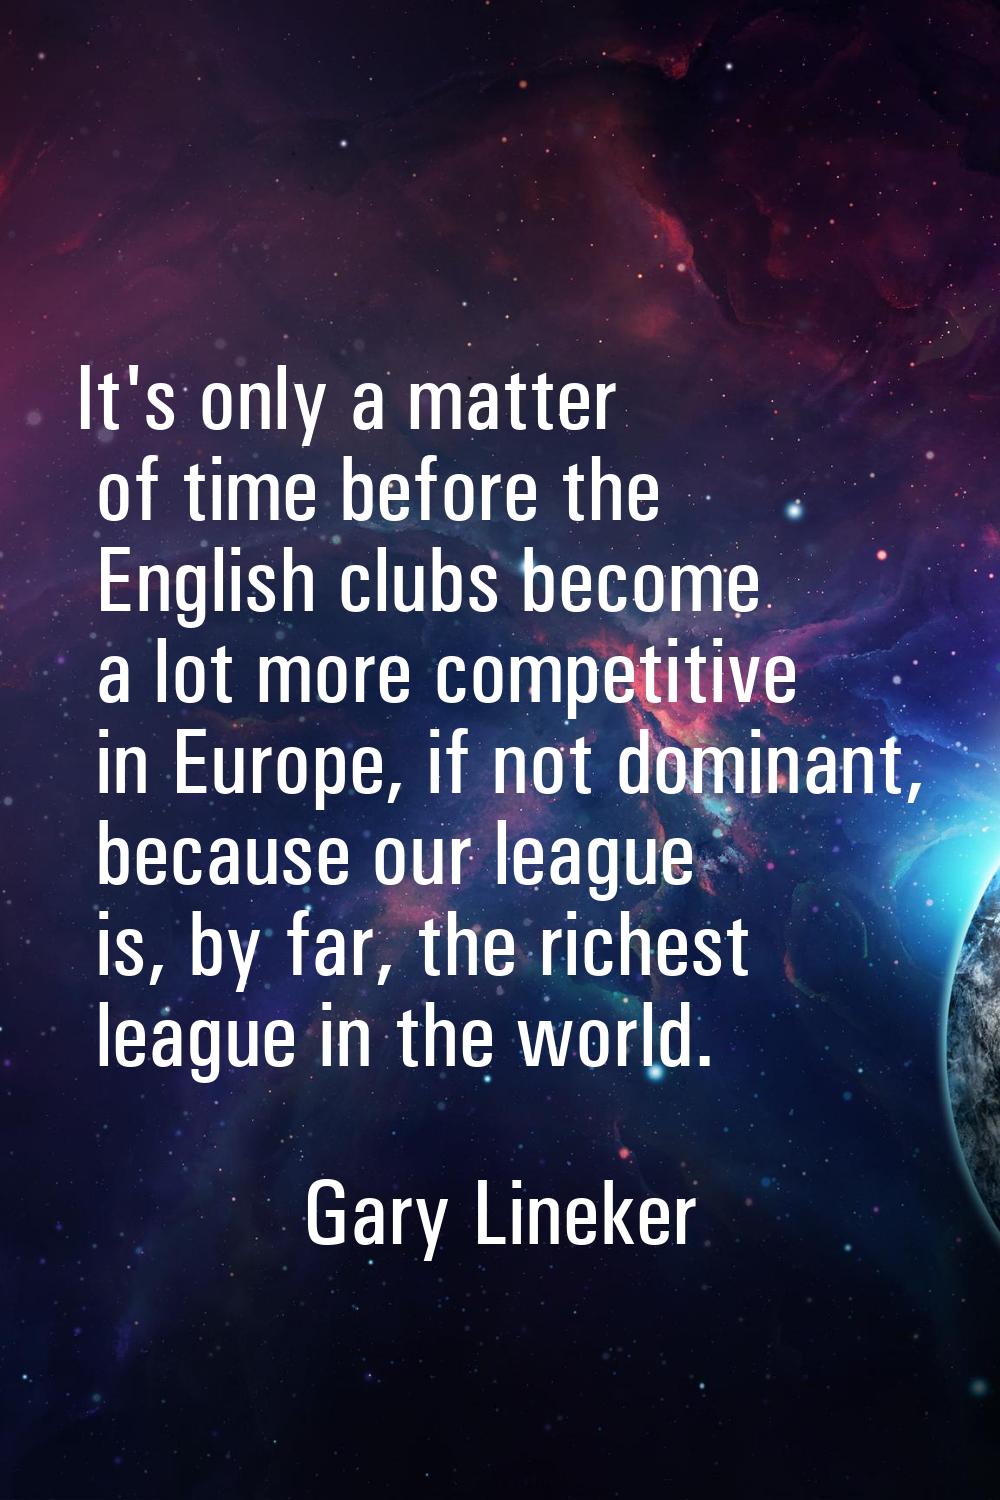 It's only a matter of time before the English clubs become a lot more competitive in Europe, if not